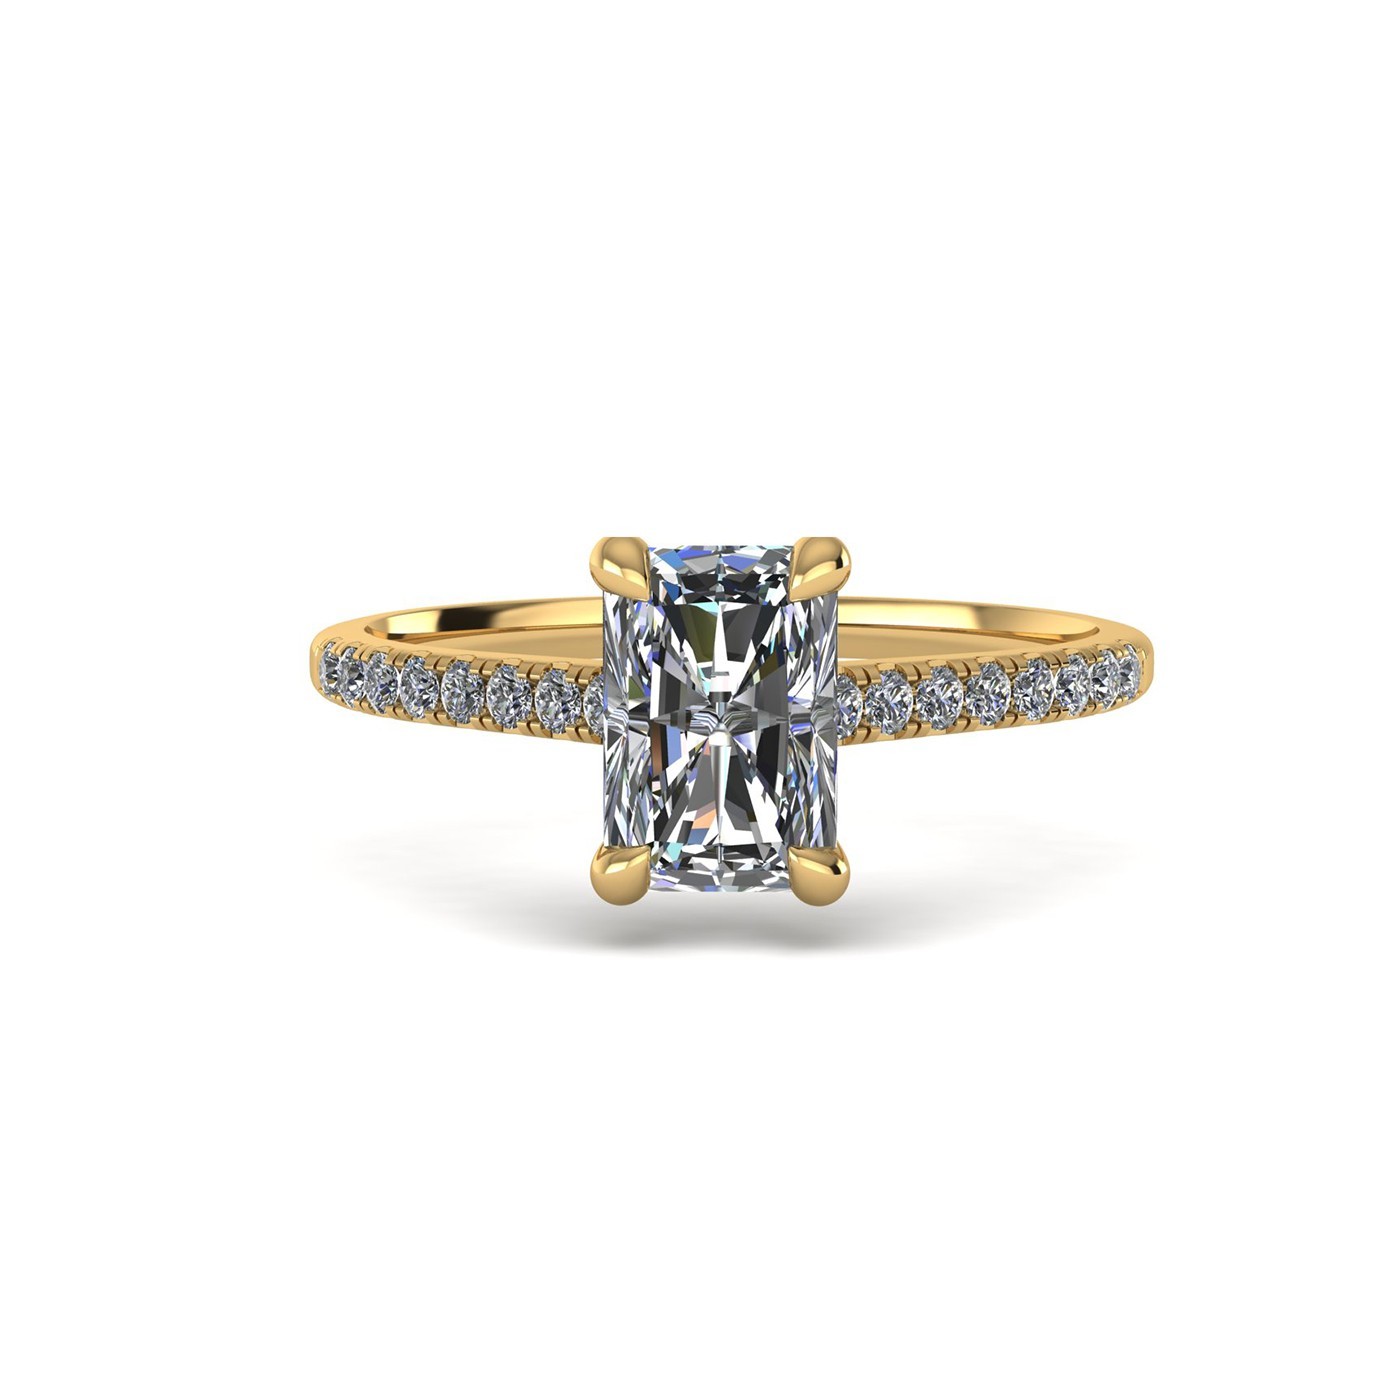 18K YELLOW GOLD 4 PRONGS RADIANT CUT DIAMOND ENGAGEMENT RING WITH WHISPER THIN PAVÉ SET BAND